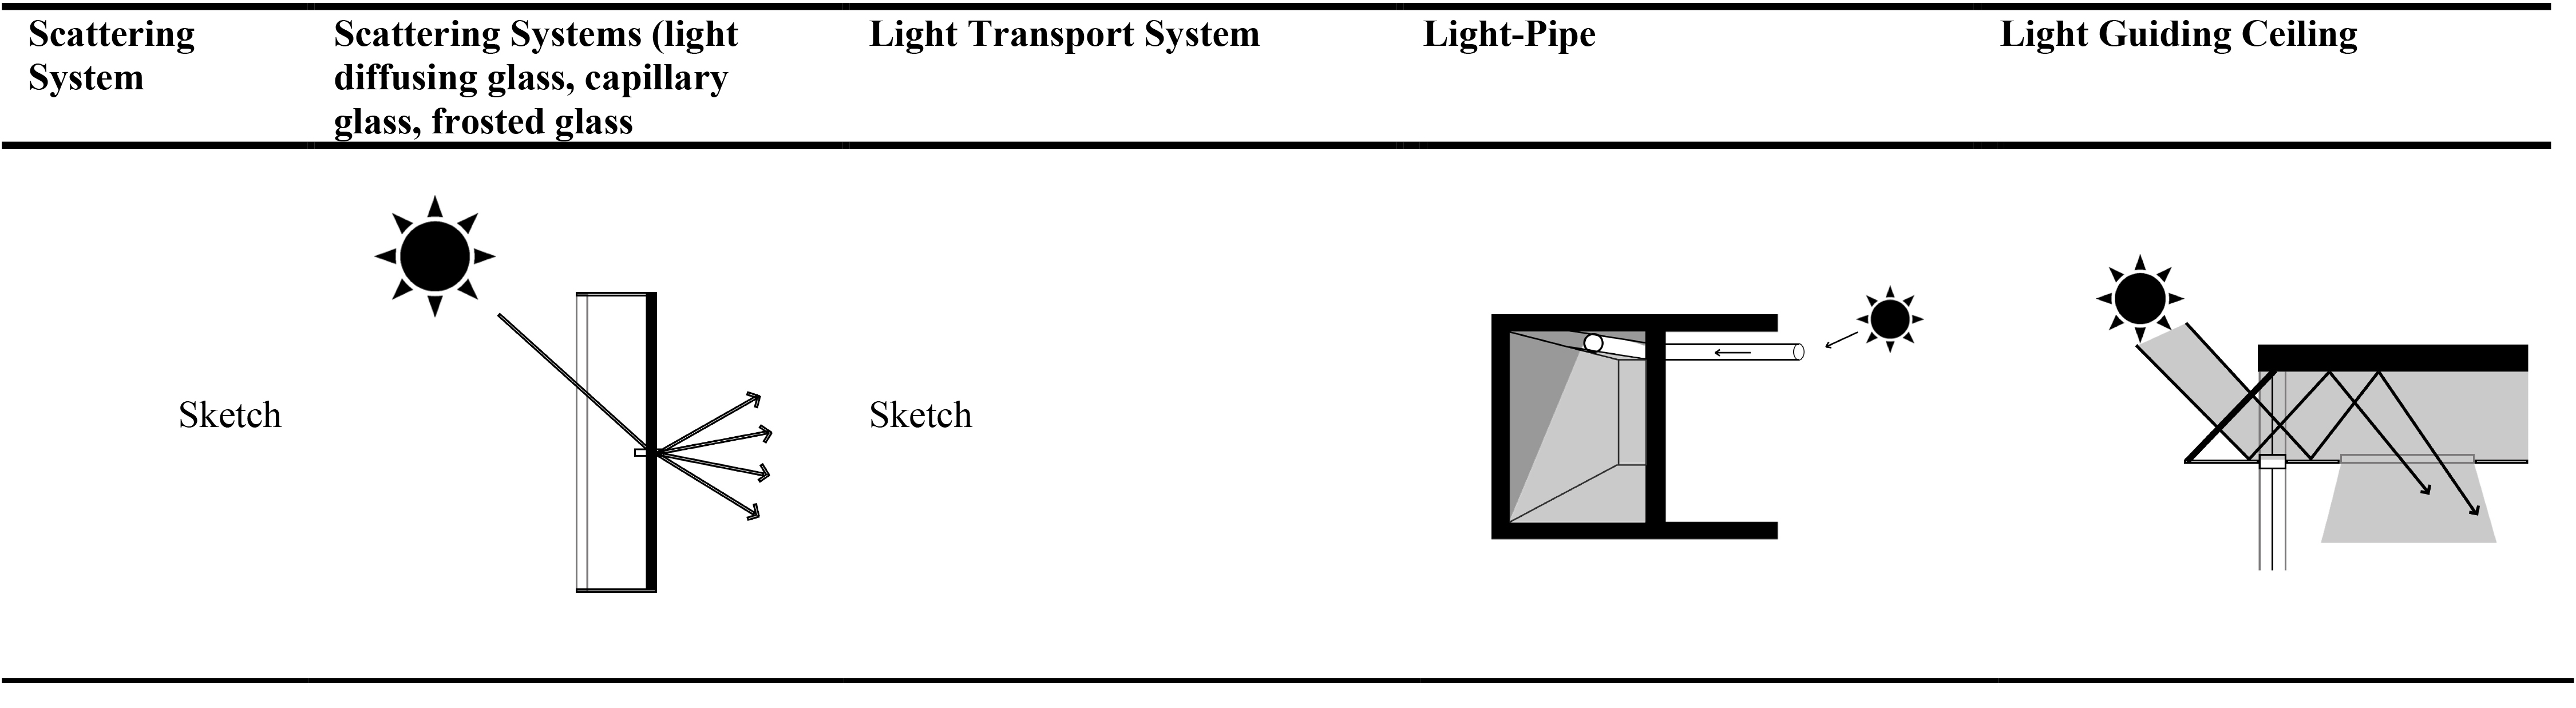 Scattering and light transport systems [22,24].